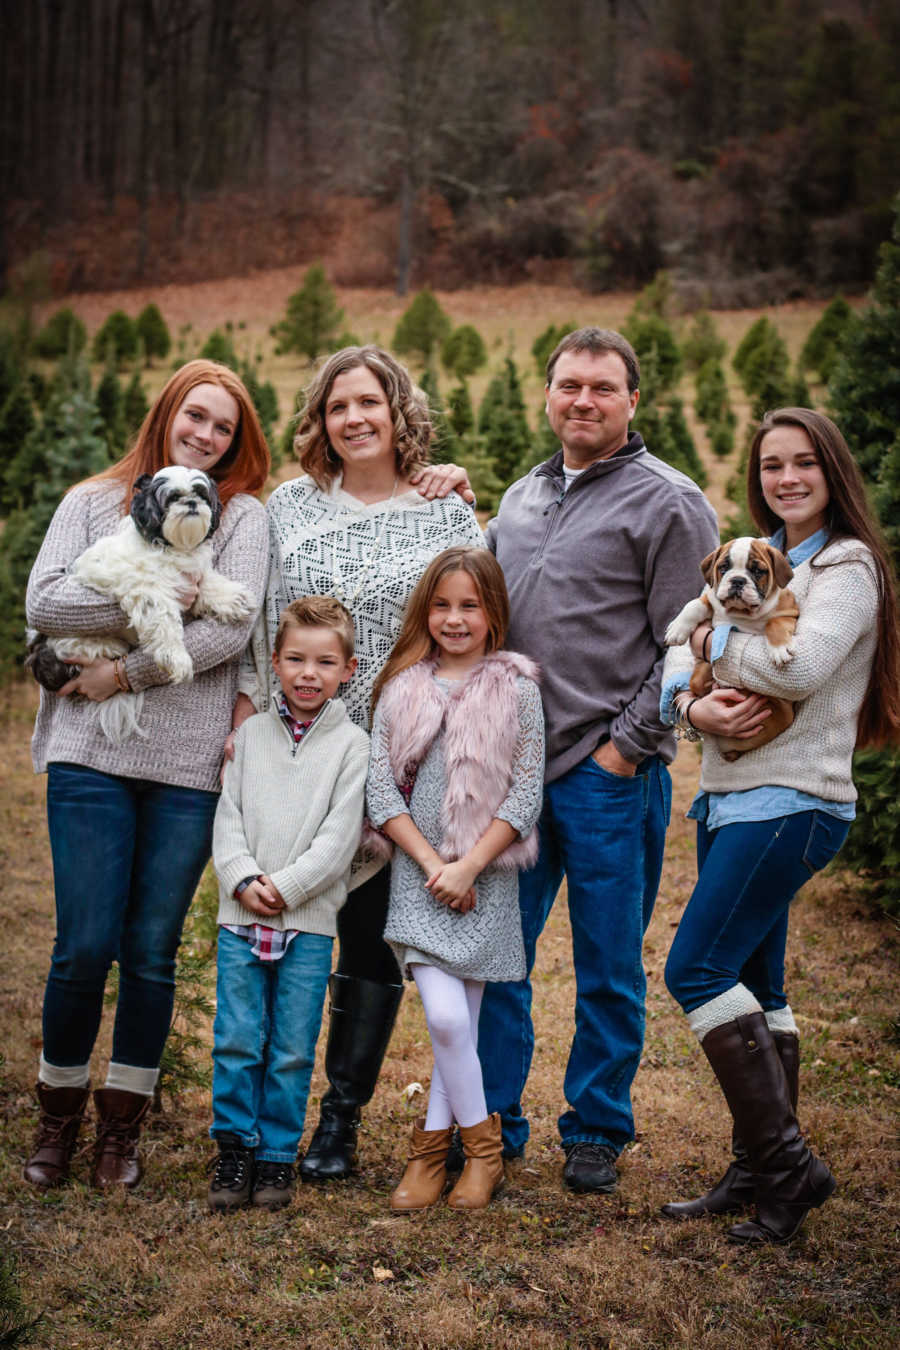 Woman who was a surrogate smiles with husband, three daughters, son and two dogs